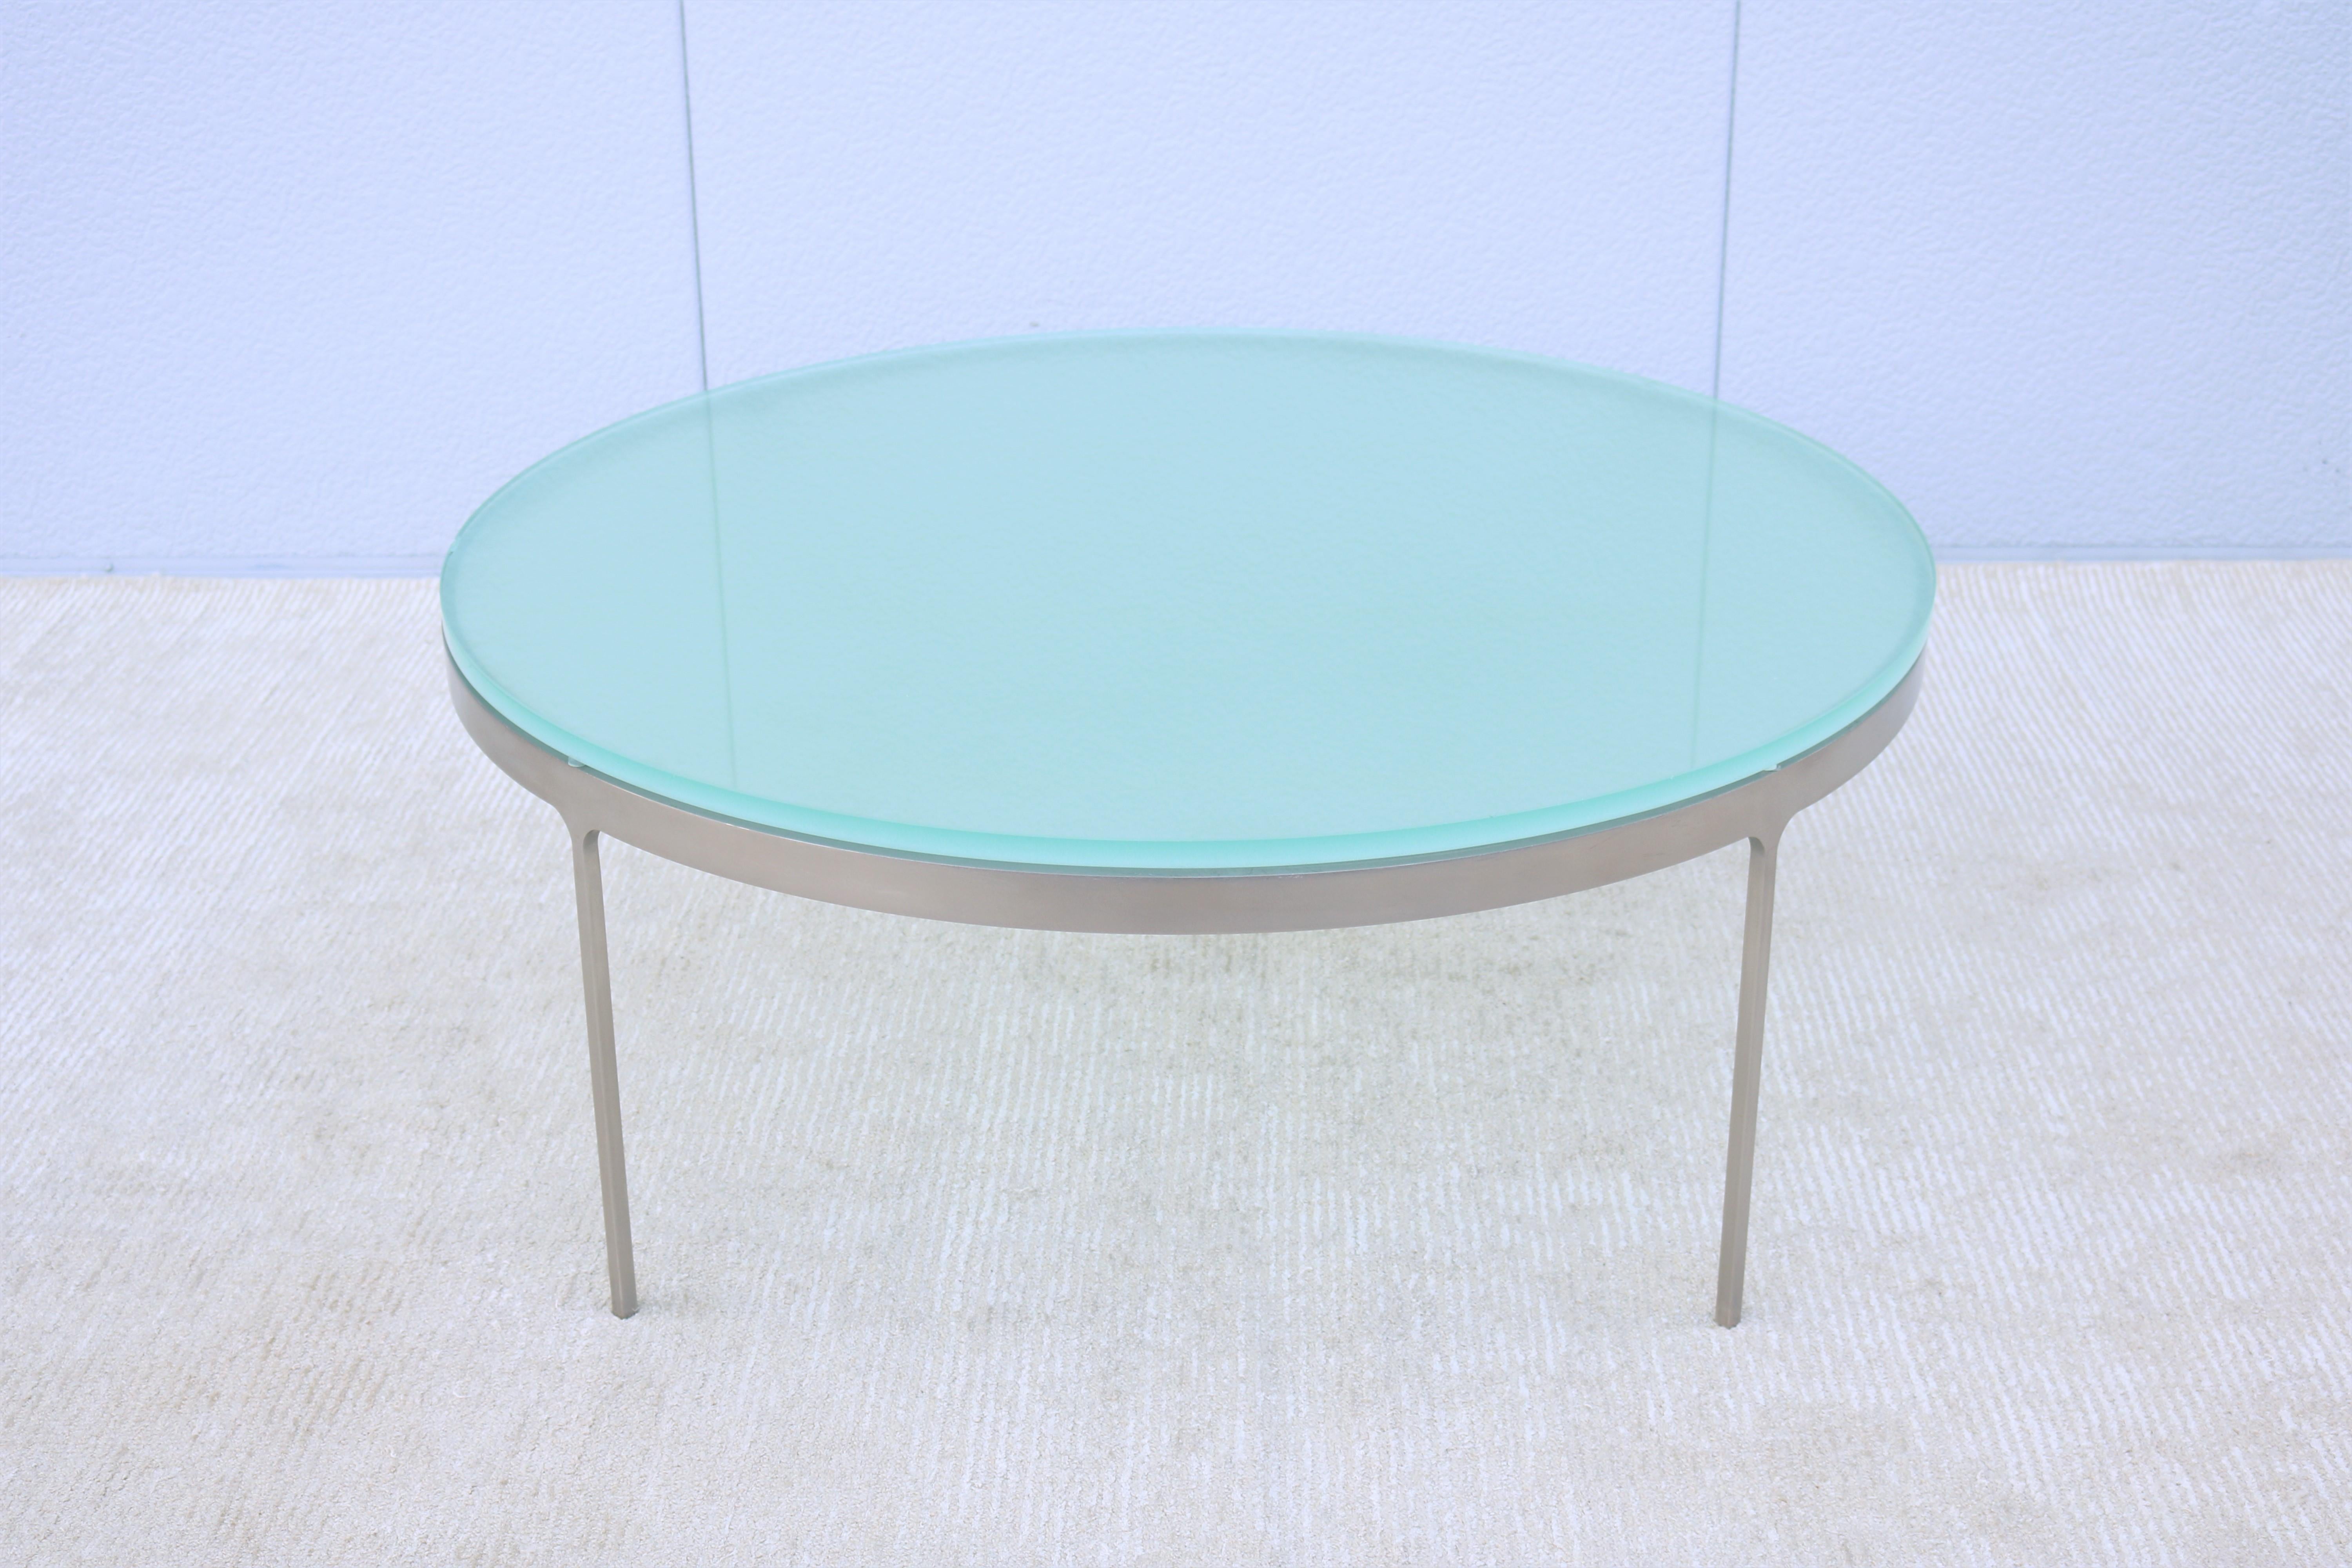 A stunning Minimalist round glass and stainless steel coffee table designed by Nicos Zographos in 1960 and remains a current timeless and elegant design today.
Zographos' signature design details in his TA35 series were the use of a solid stainless